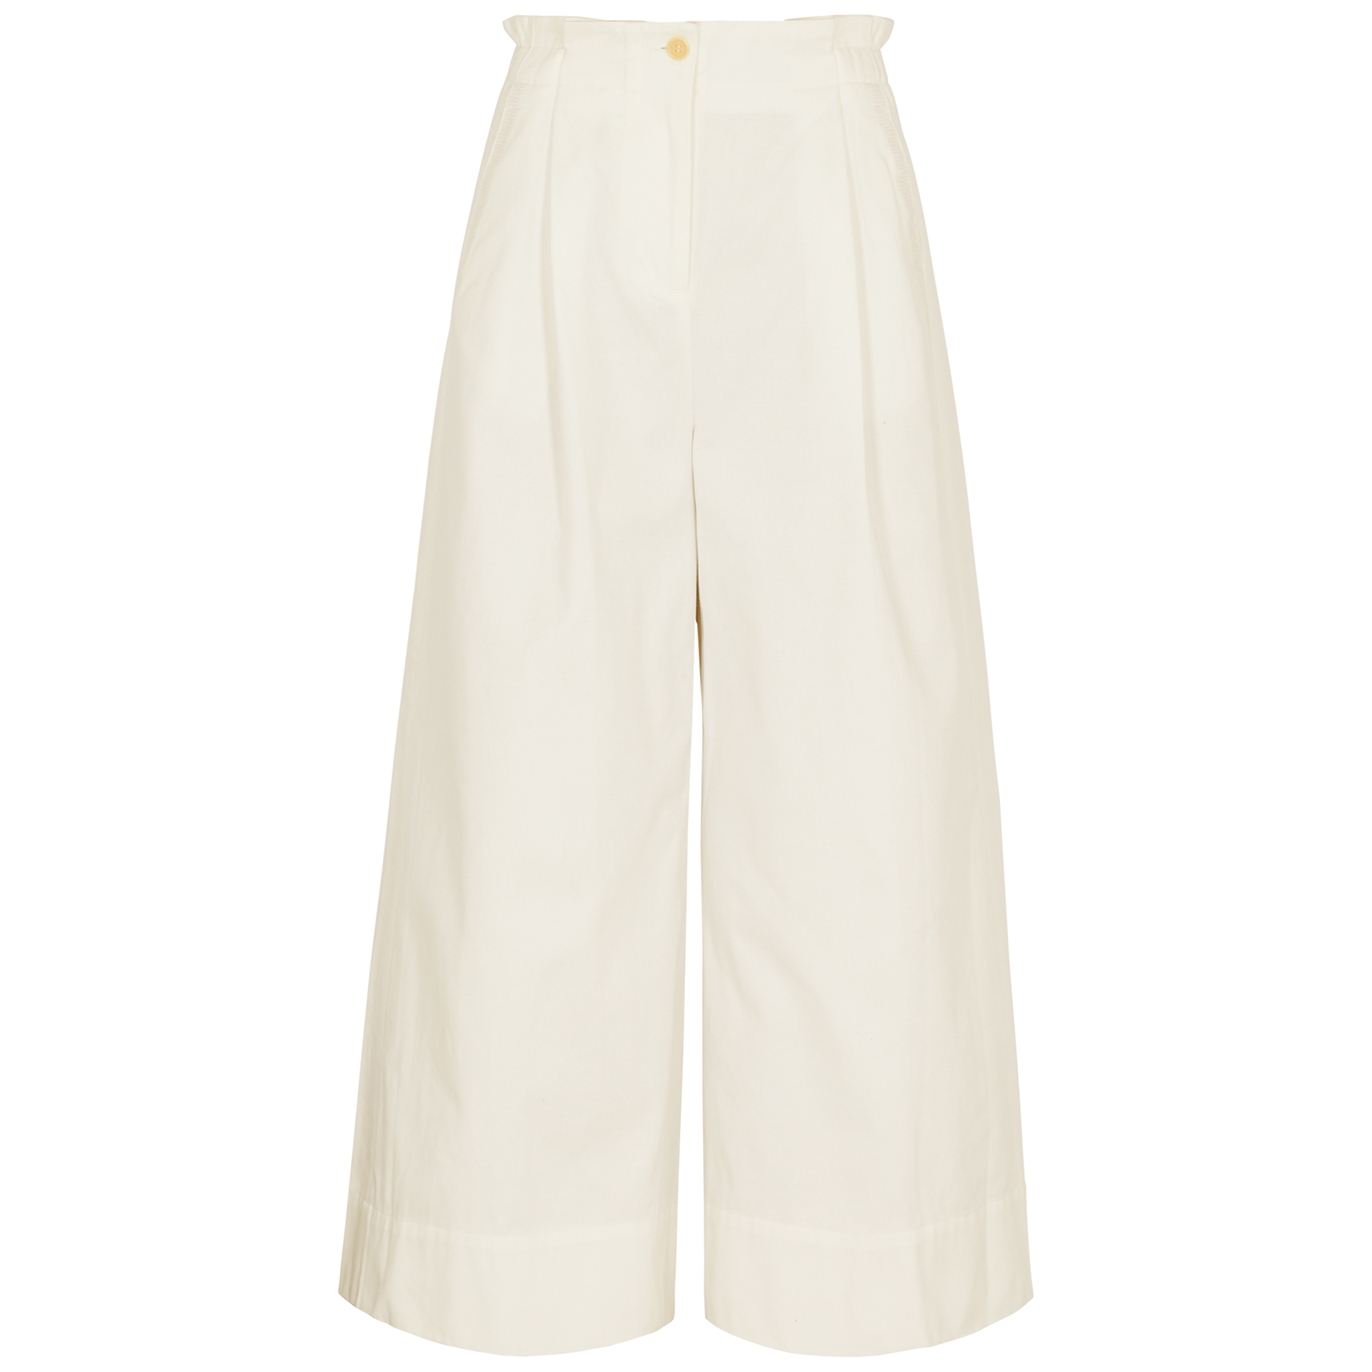 MERLETTE MERLETTE SARGENT CROPPED COTTON TROUSERS